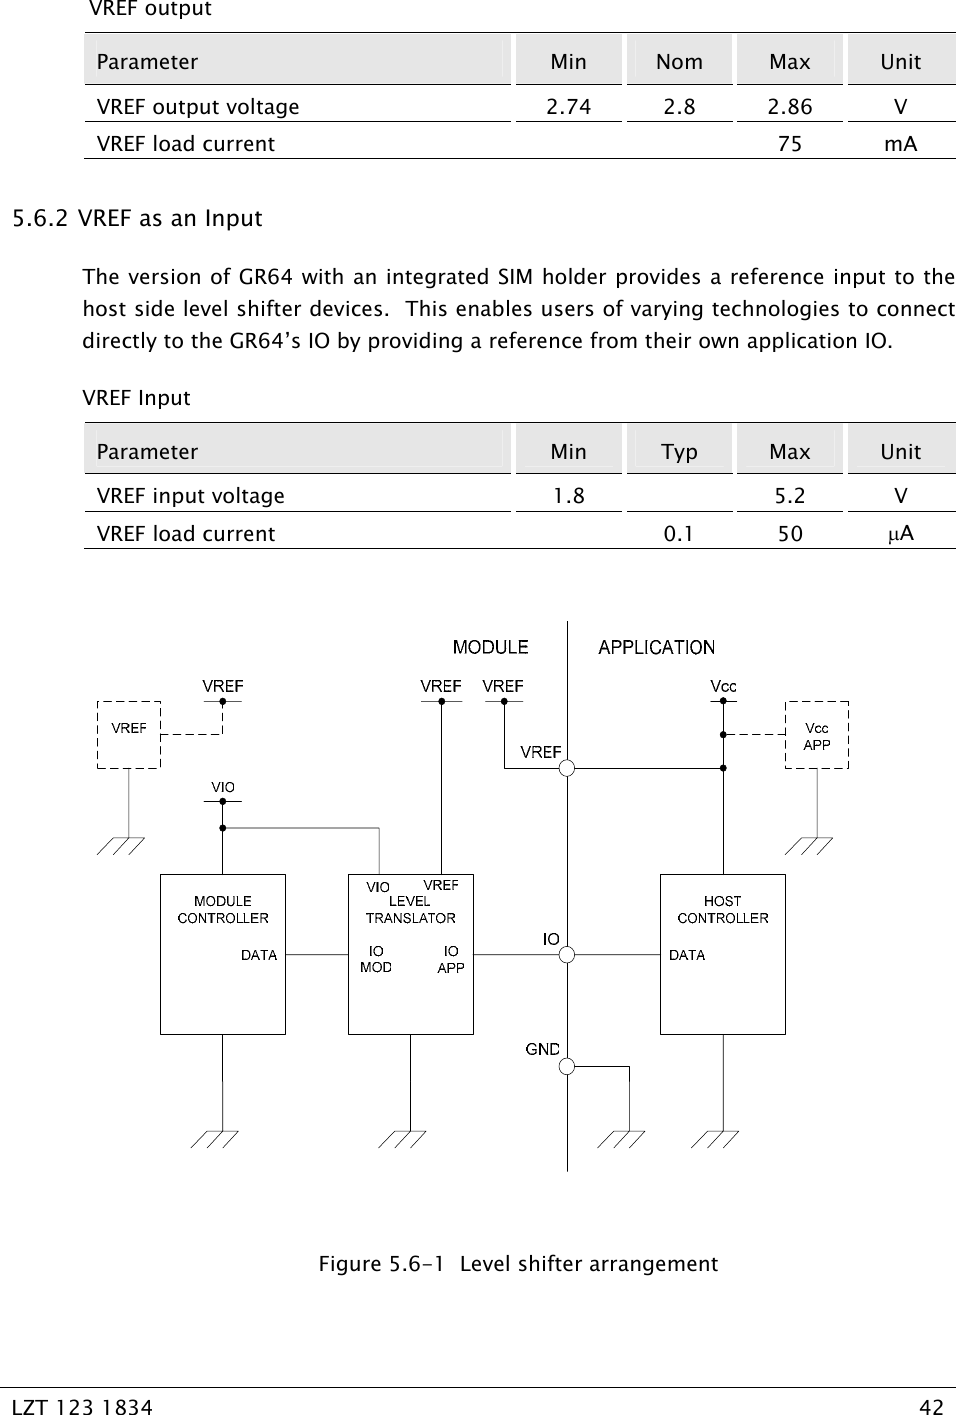   LZT 123 1834  42    VREF output Parameter  Min  Nom  Max  Unit VREF output voltage   2.74  2.8  2.86  V VREF load current      75  mA 5.6.2  VREF as an Input The version of GR64 with an integrated SIM holder provides a reference input to the host side level shifter devices.  This enables users of varying technologies to connect directly to the GR64’s IO by providing a reference from their own application IO.   VREF Input Parameter  Min  Typ  Max  Unit VREF input voltage   1.8    5.2  V VREF load current    0.1  50  µA    Figure 5.6-1  Level shifter arrangement 